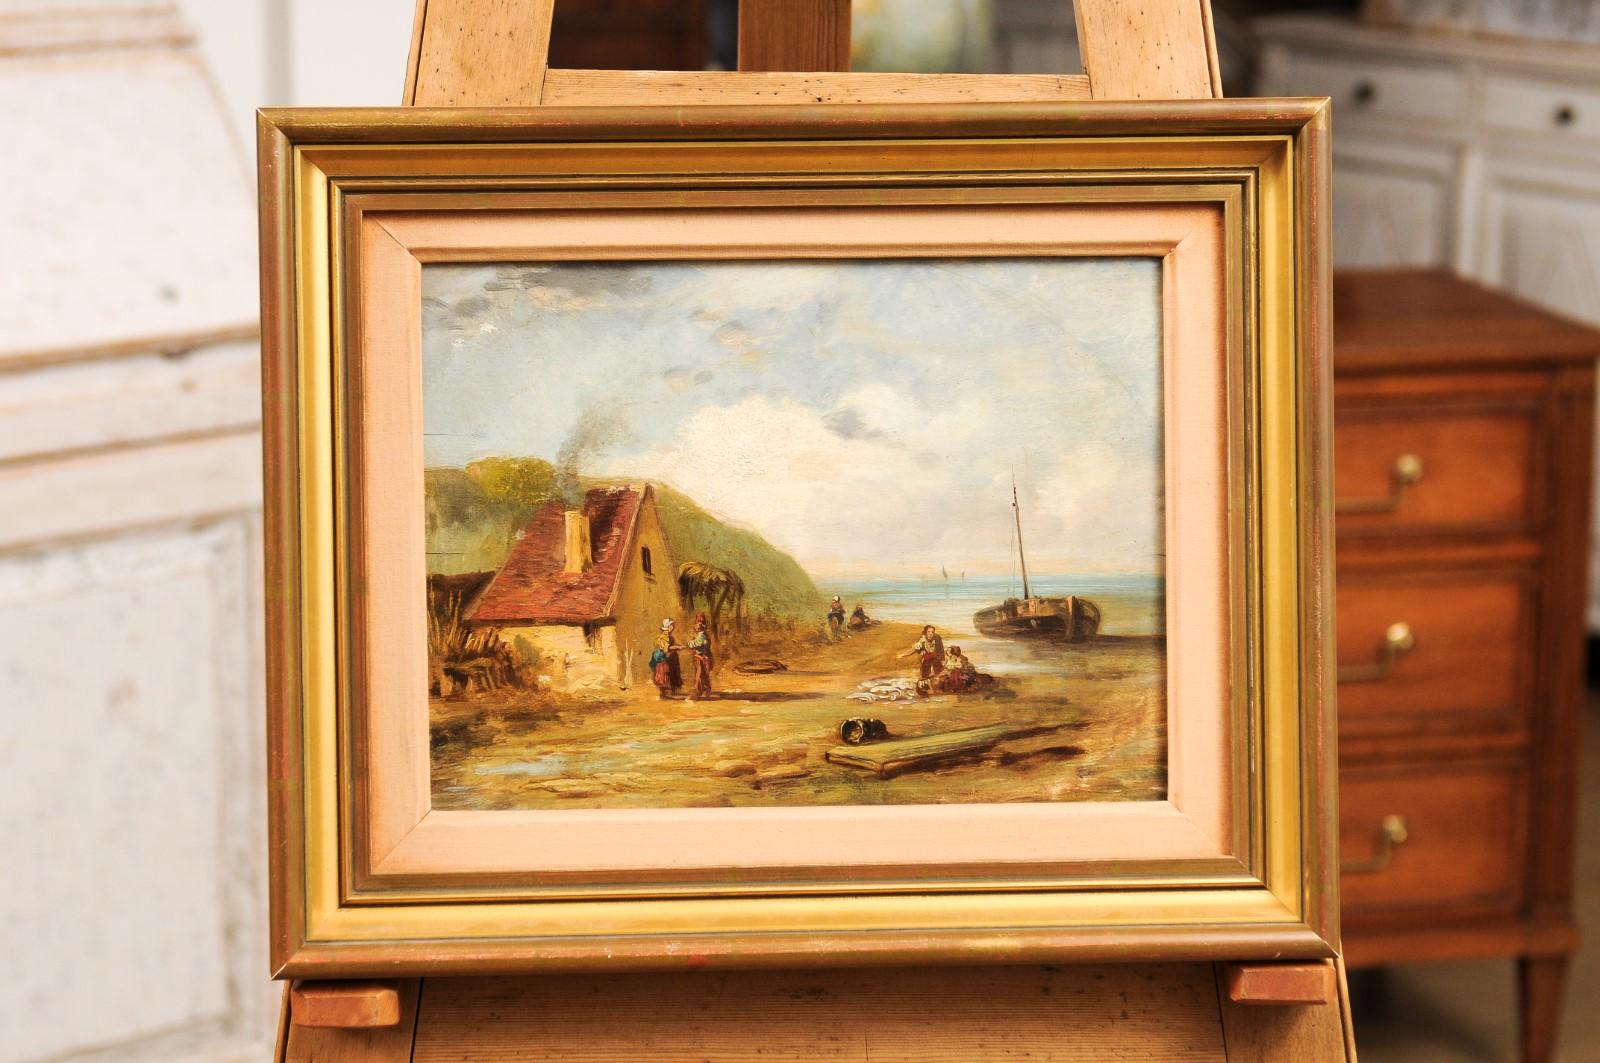 Gilt French 19th Century Framed Oil On Panel Painting Depicting a Village by the Sea For Sale